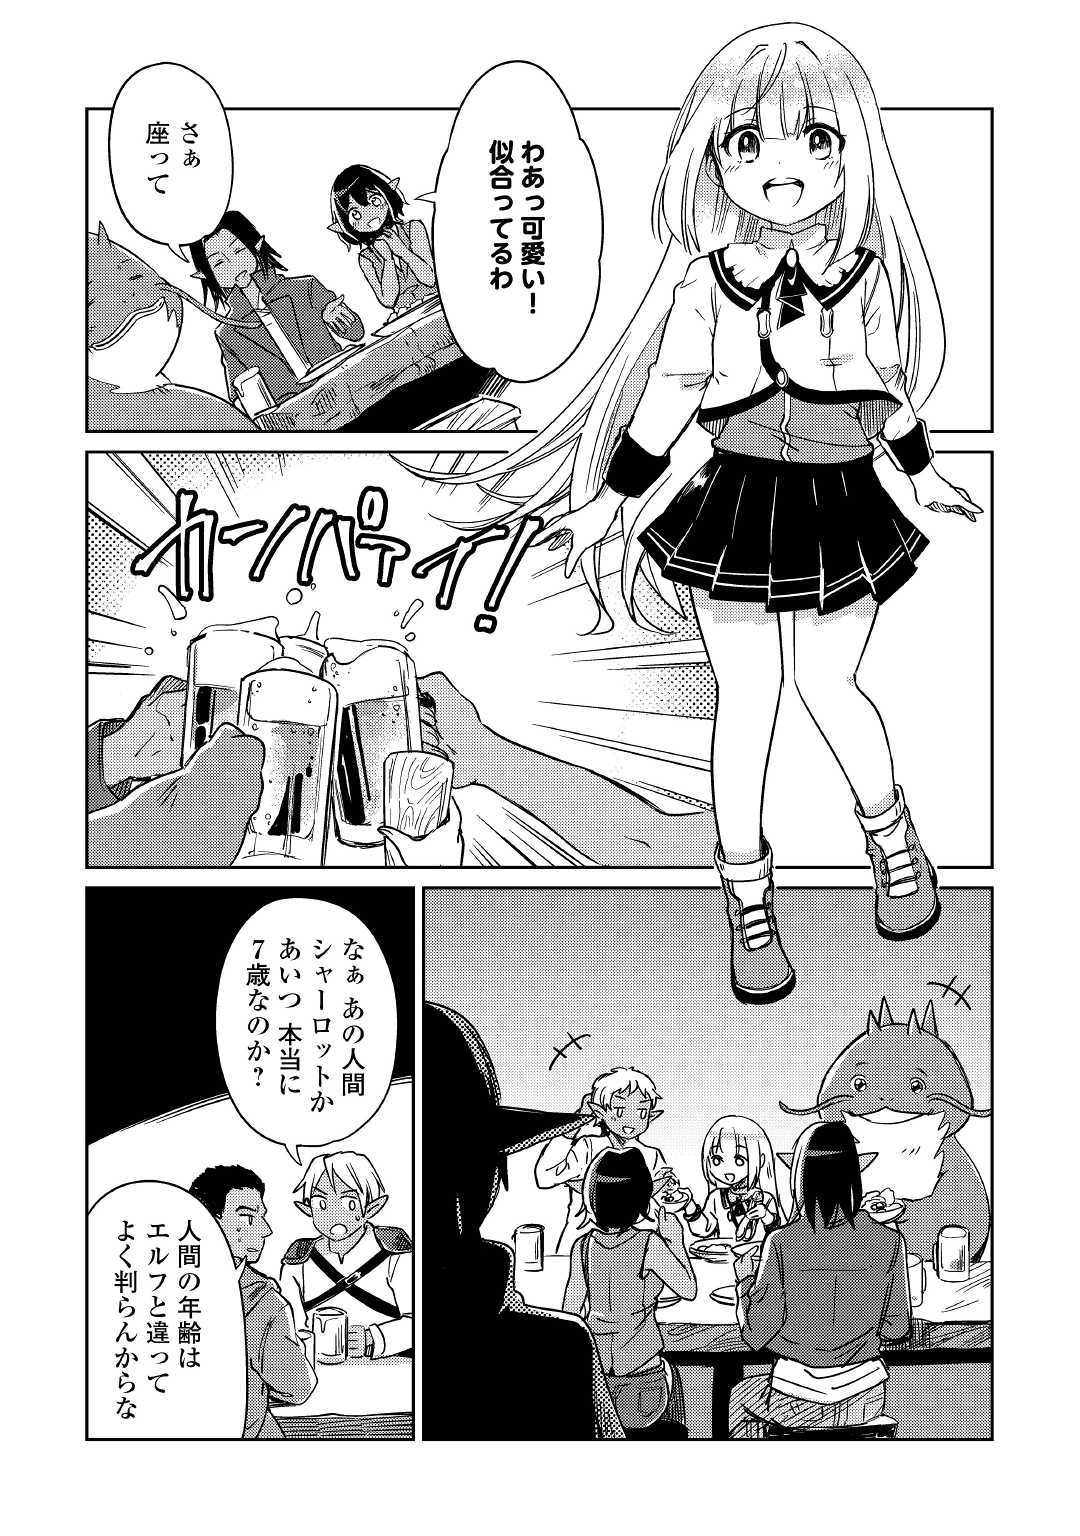 The Former Structural Researcher’s Story of Otherworldly Adventure 第19話 - Page 27